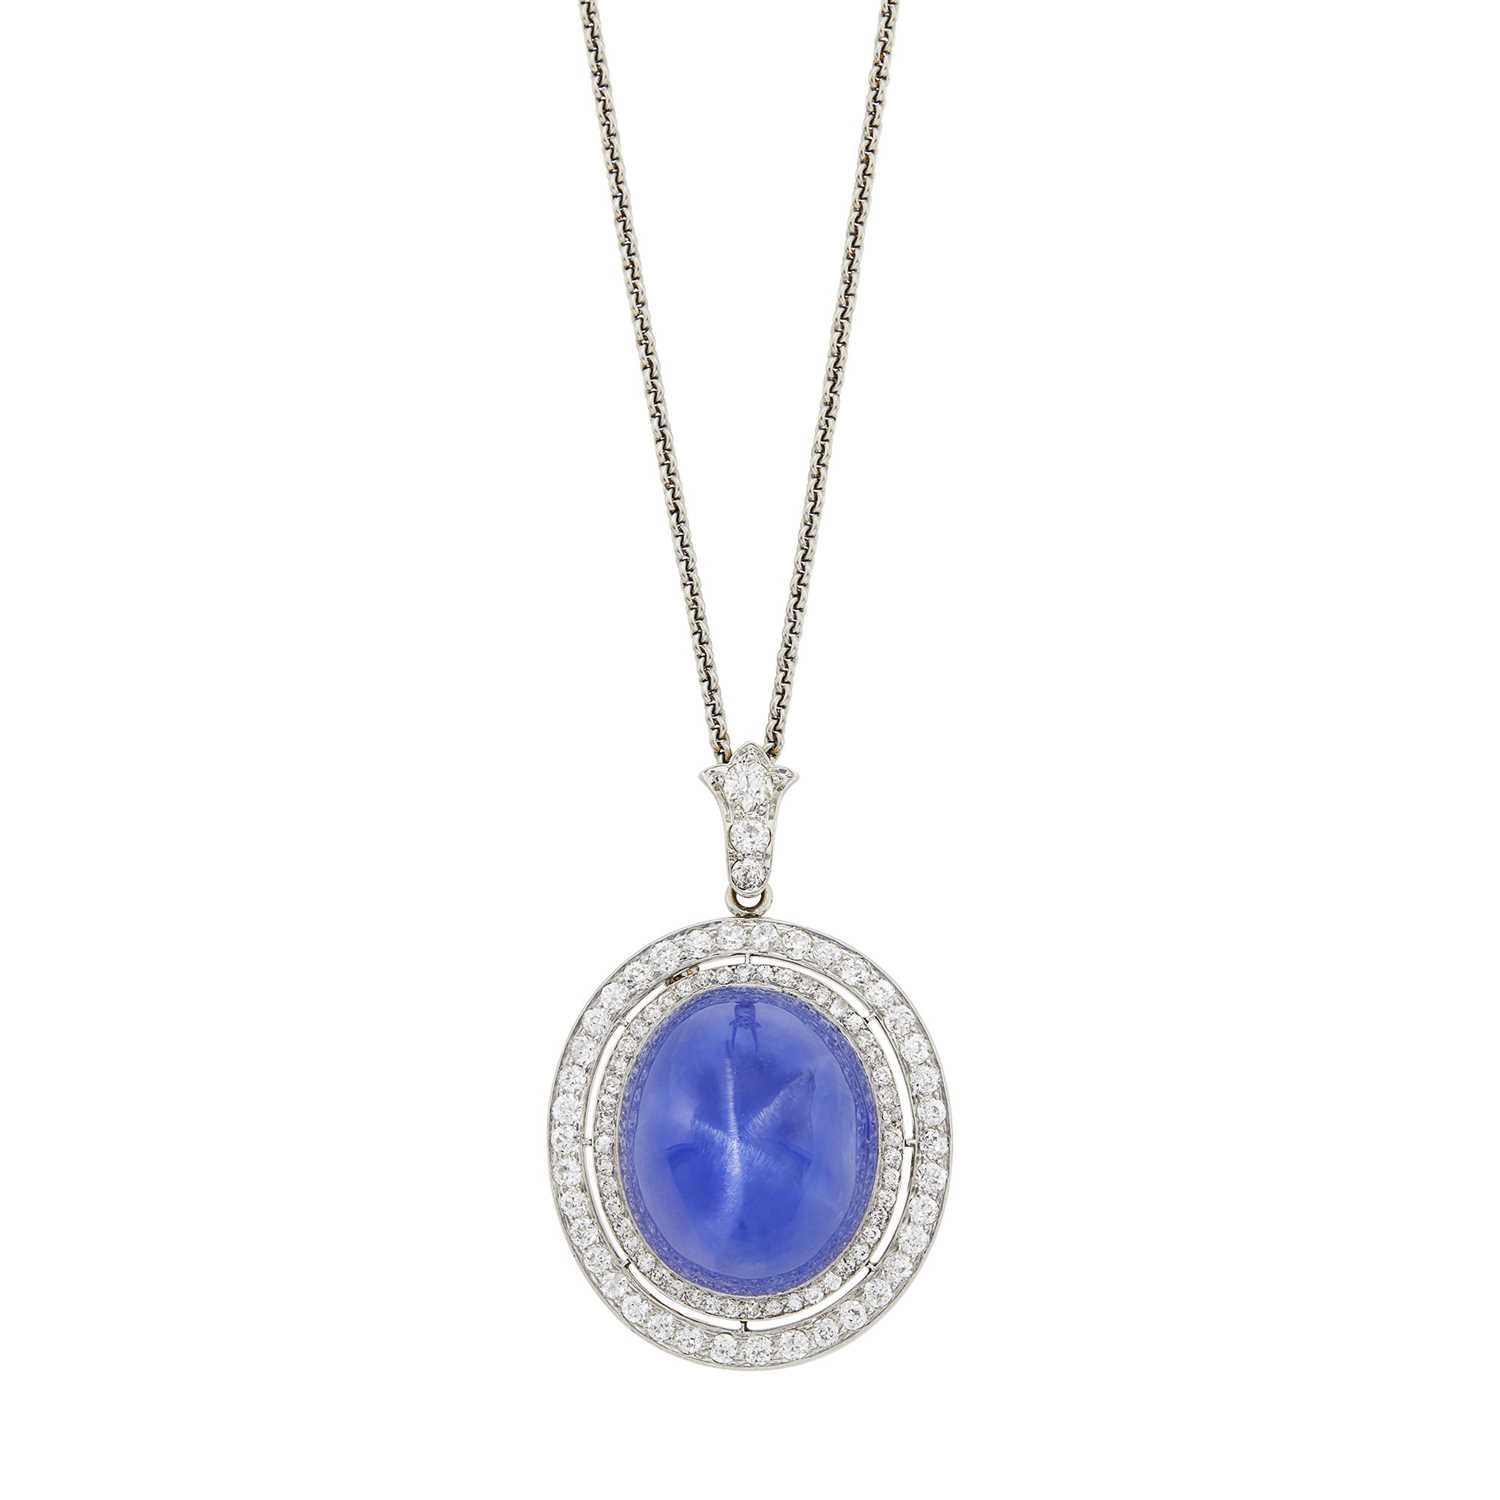 Lot 139 - Frank Walter Lawrence Platinum, Gold, Star Sapphire and Diamond Pendant-Brooch with Chain Necklace